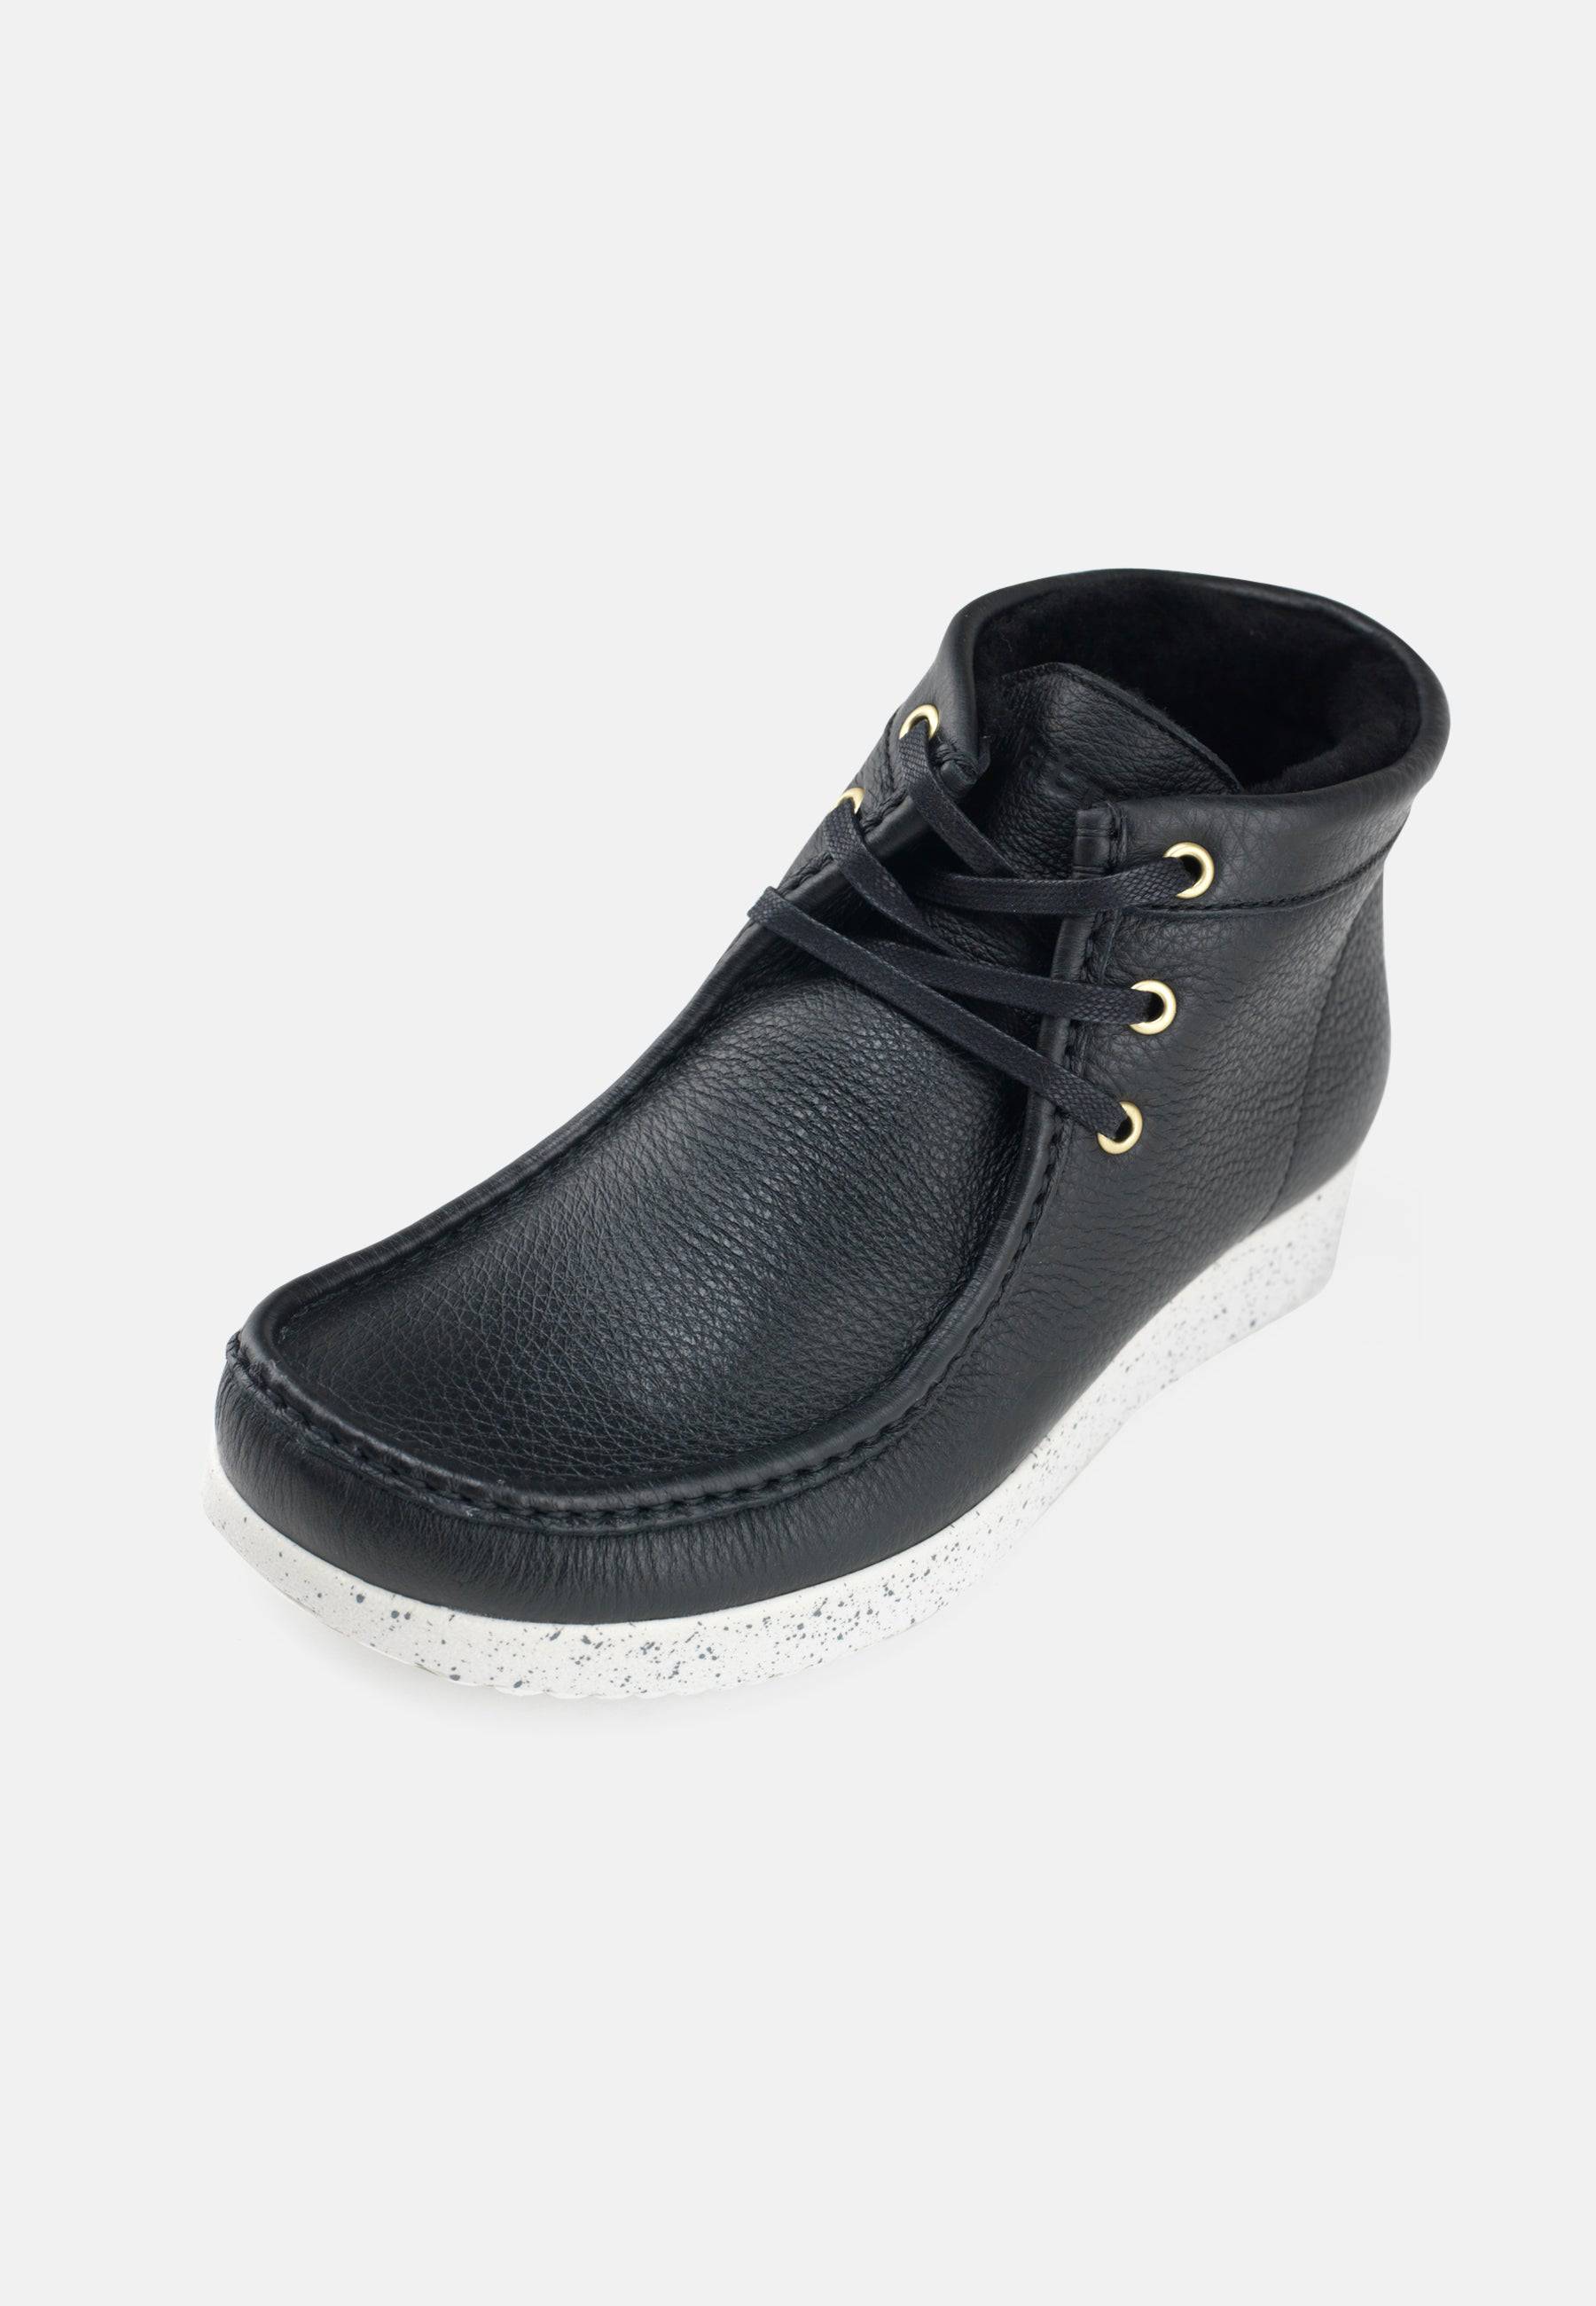 Anton Warm Lined Boot Leather - Black